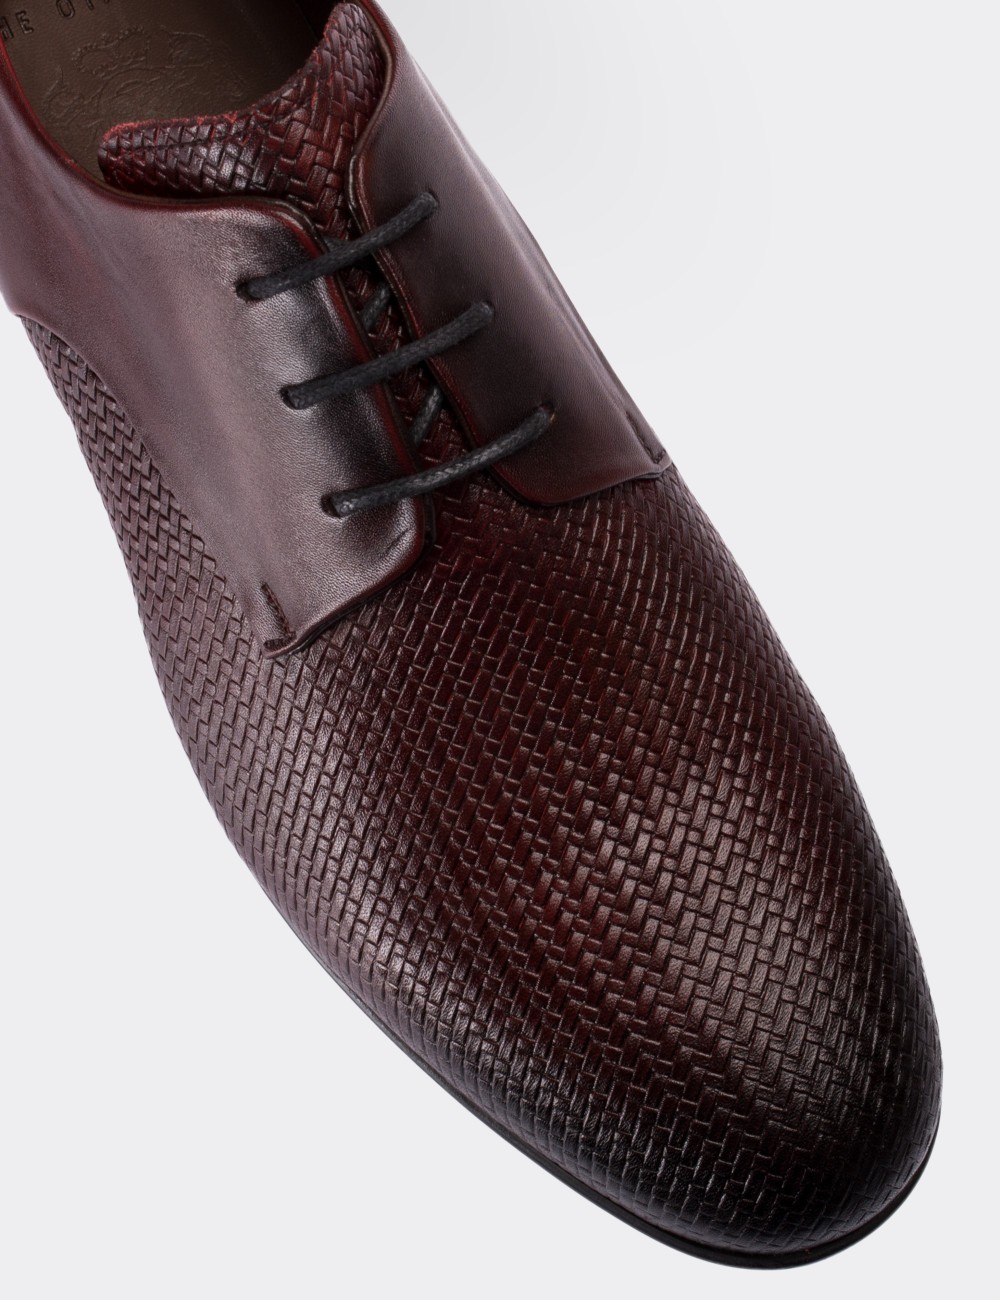 Burgundy  Leather Classic Shoes - 01709MBRDC01